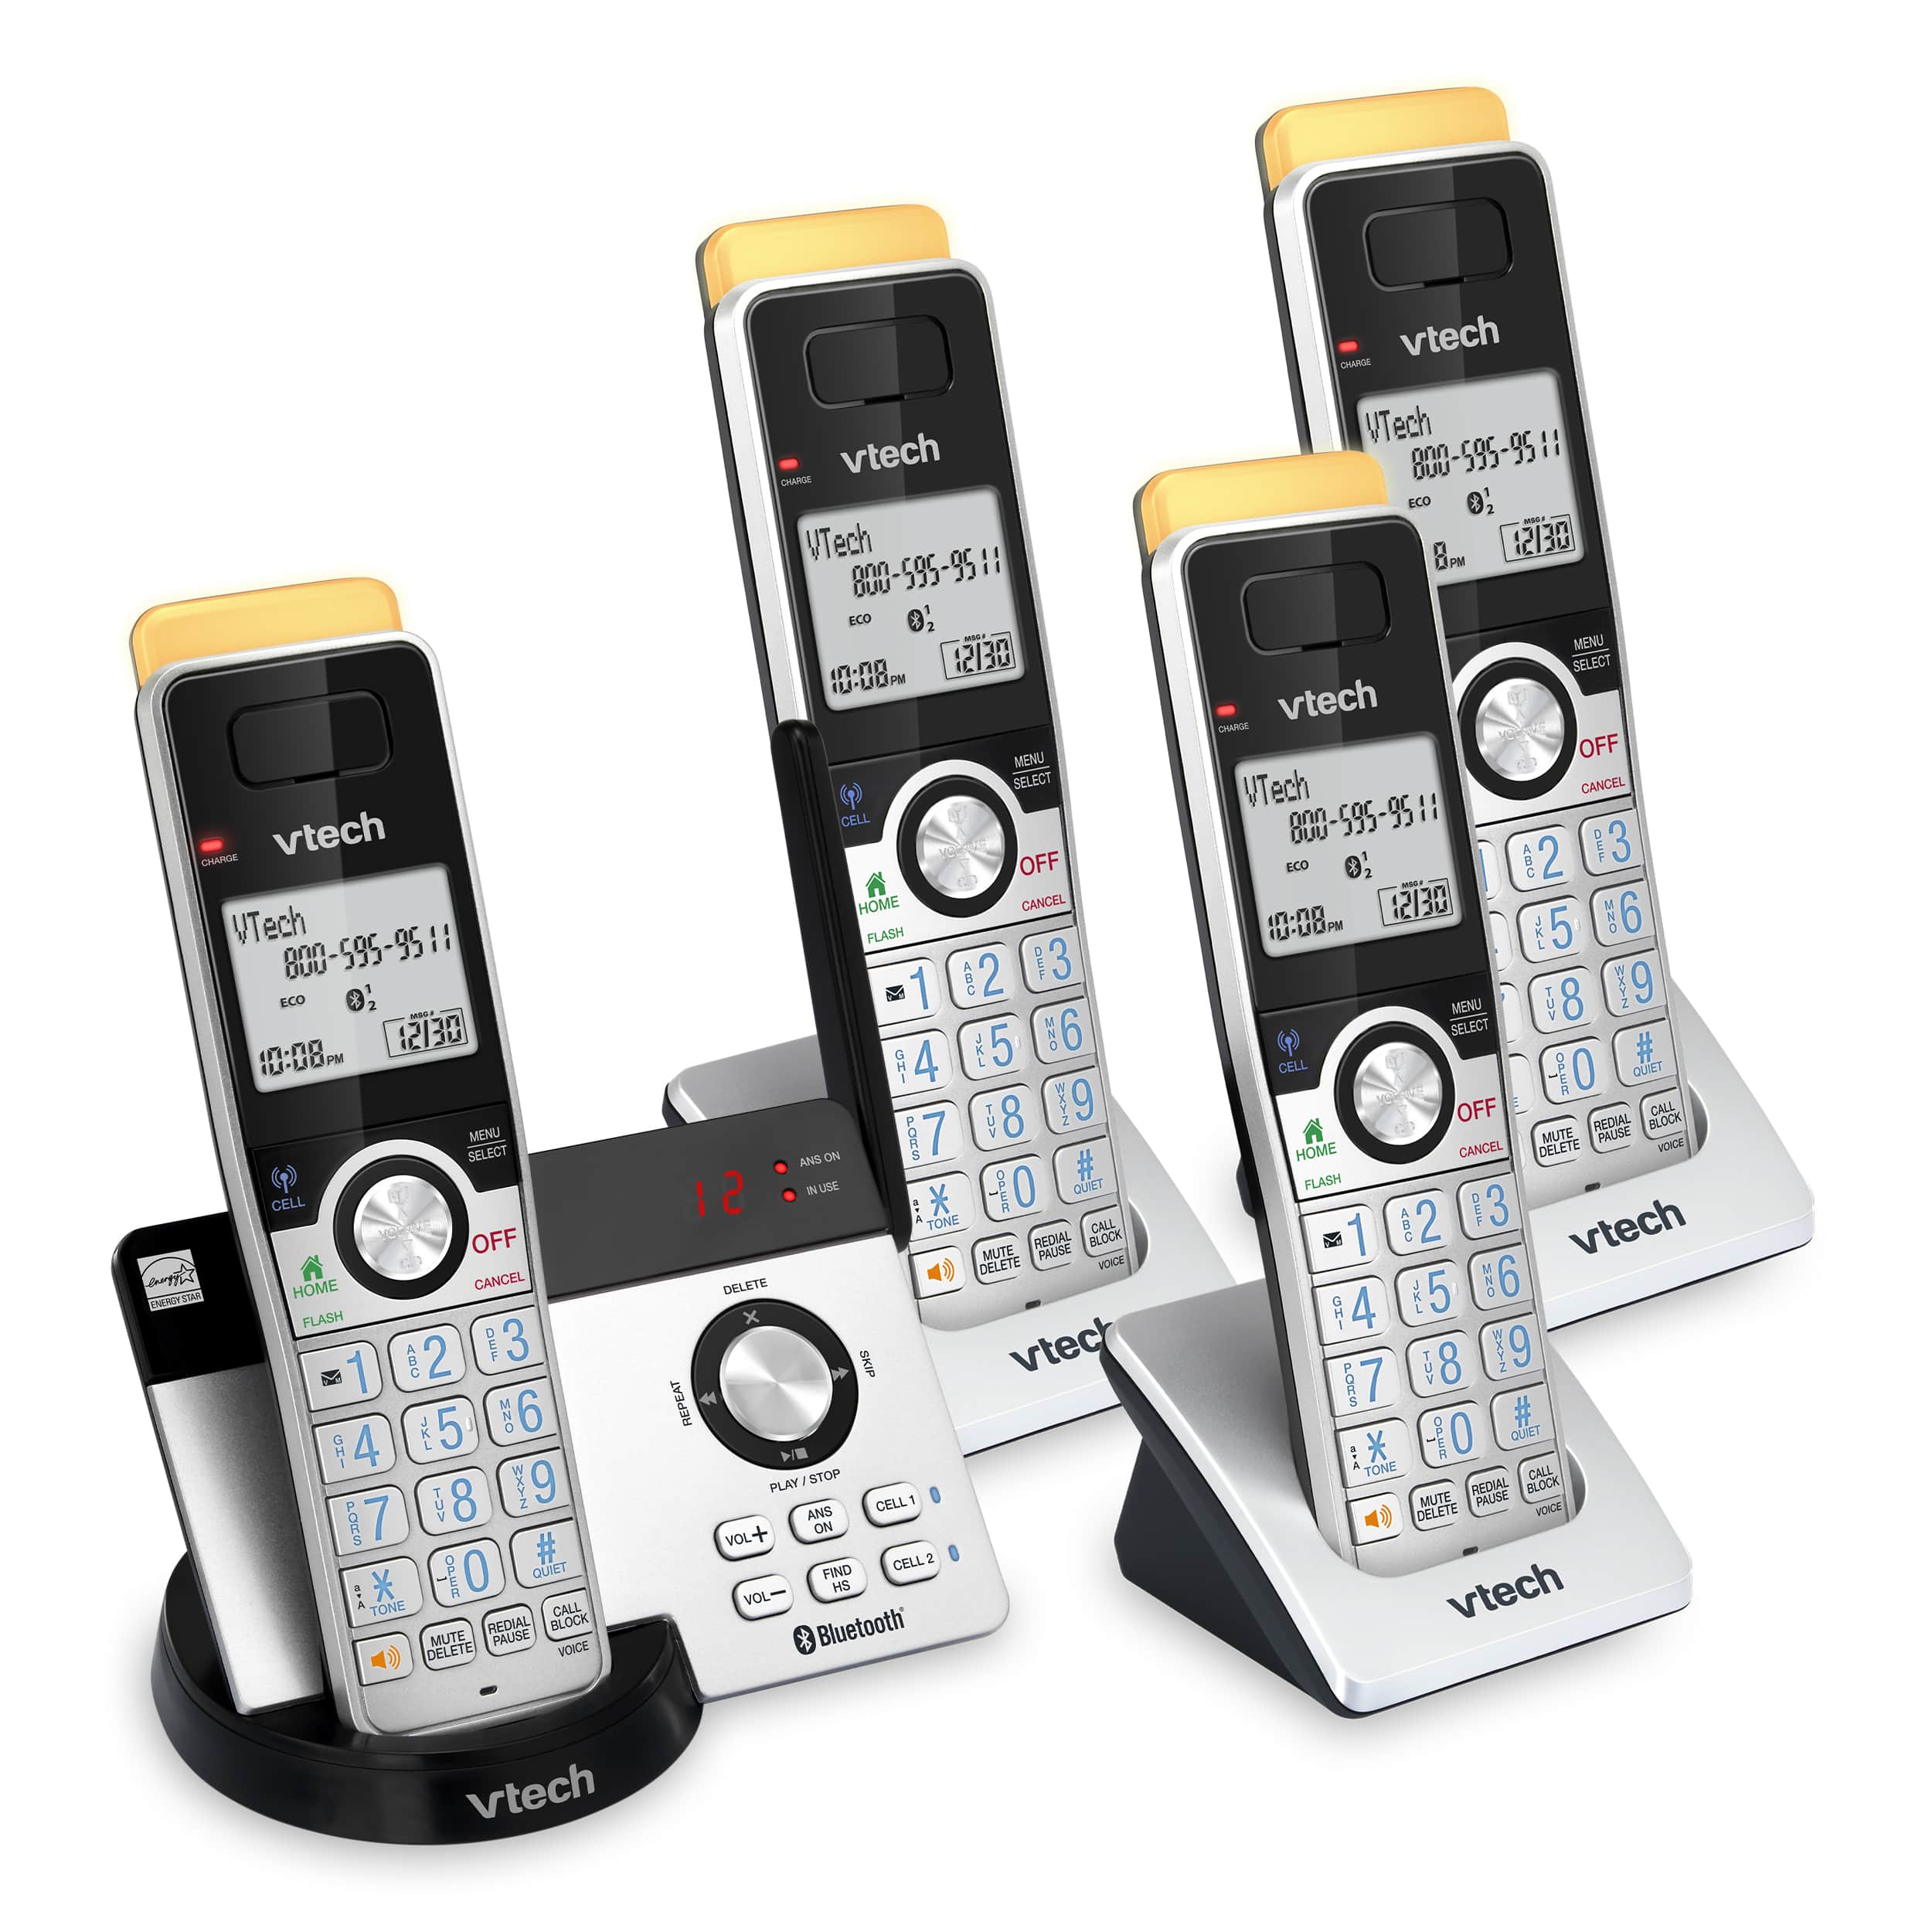 4-Handset Expandable Cordless Phone with Super Long Range, Bluetooth Connect to Cell, Smart Call Blocker and Answering System